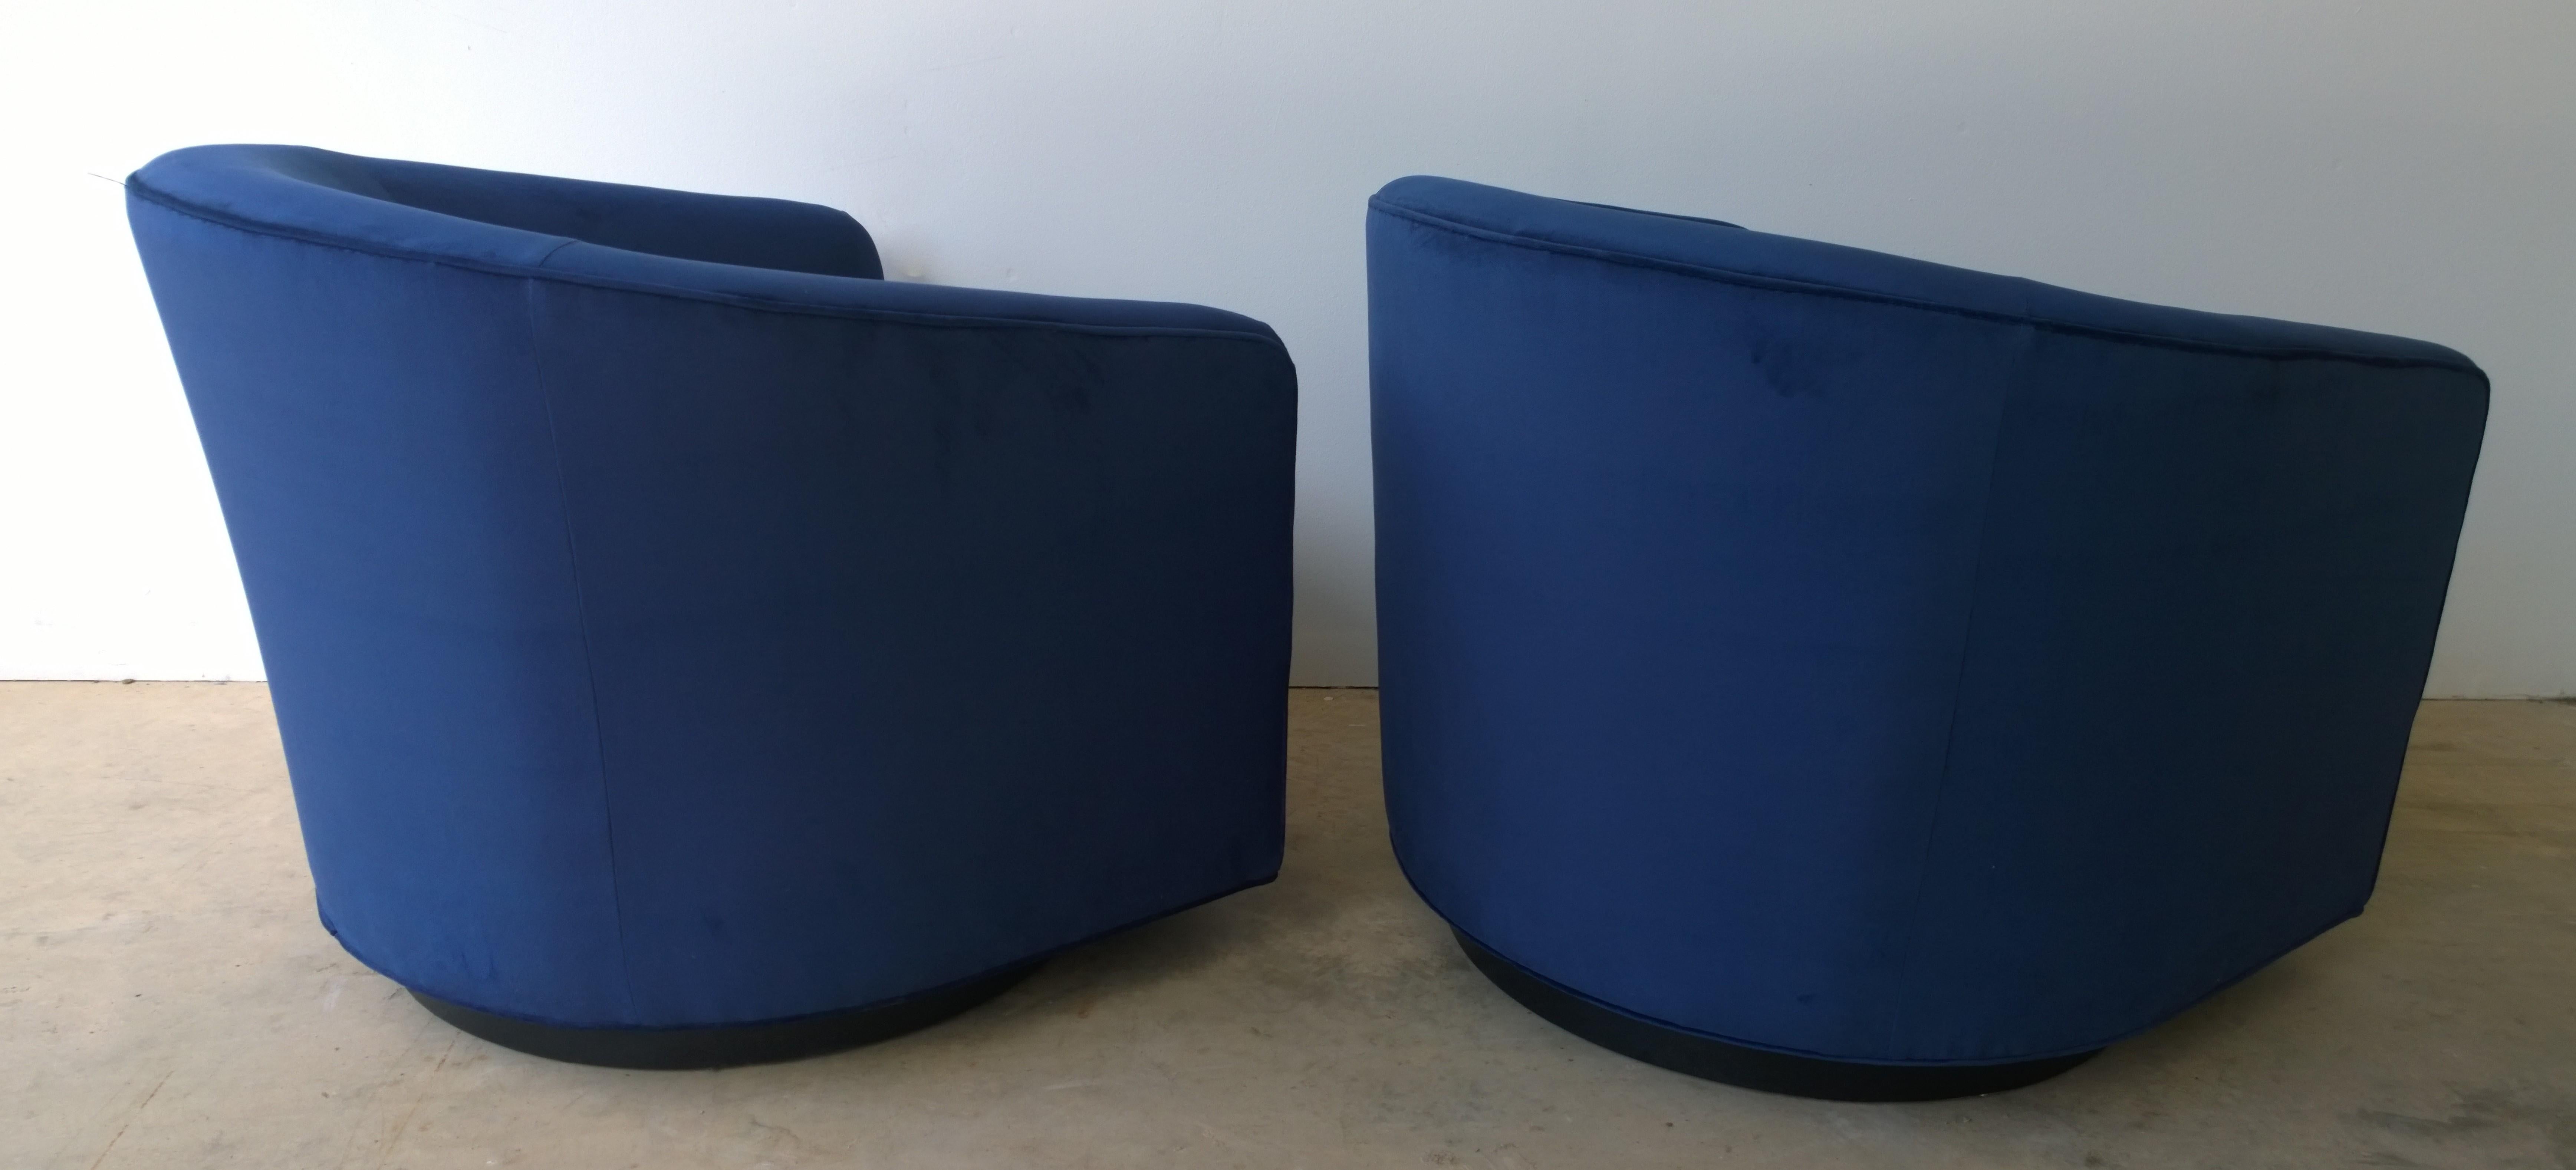 Pair of Baughman Style New Blue Cotton Velvet Swivel Chairs w/ Ebony Wood Bases For Sale 4